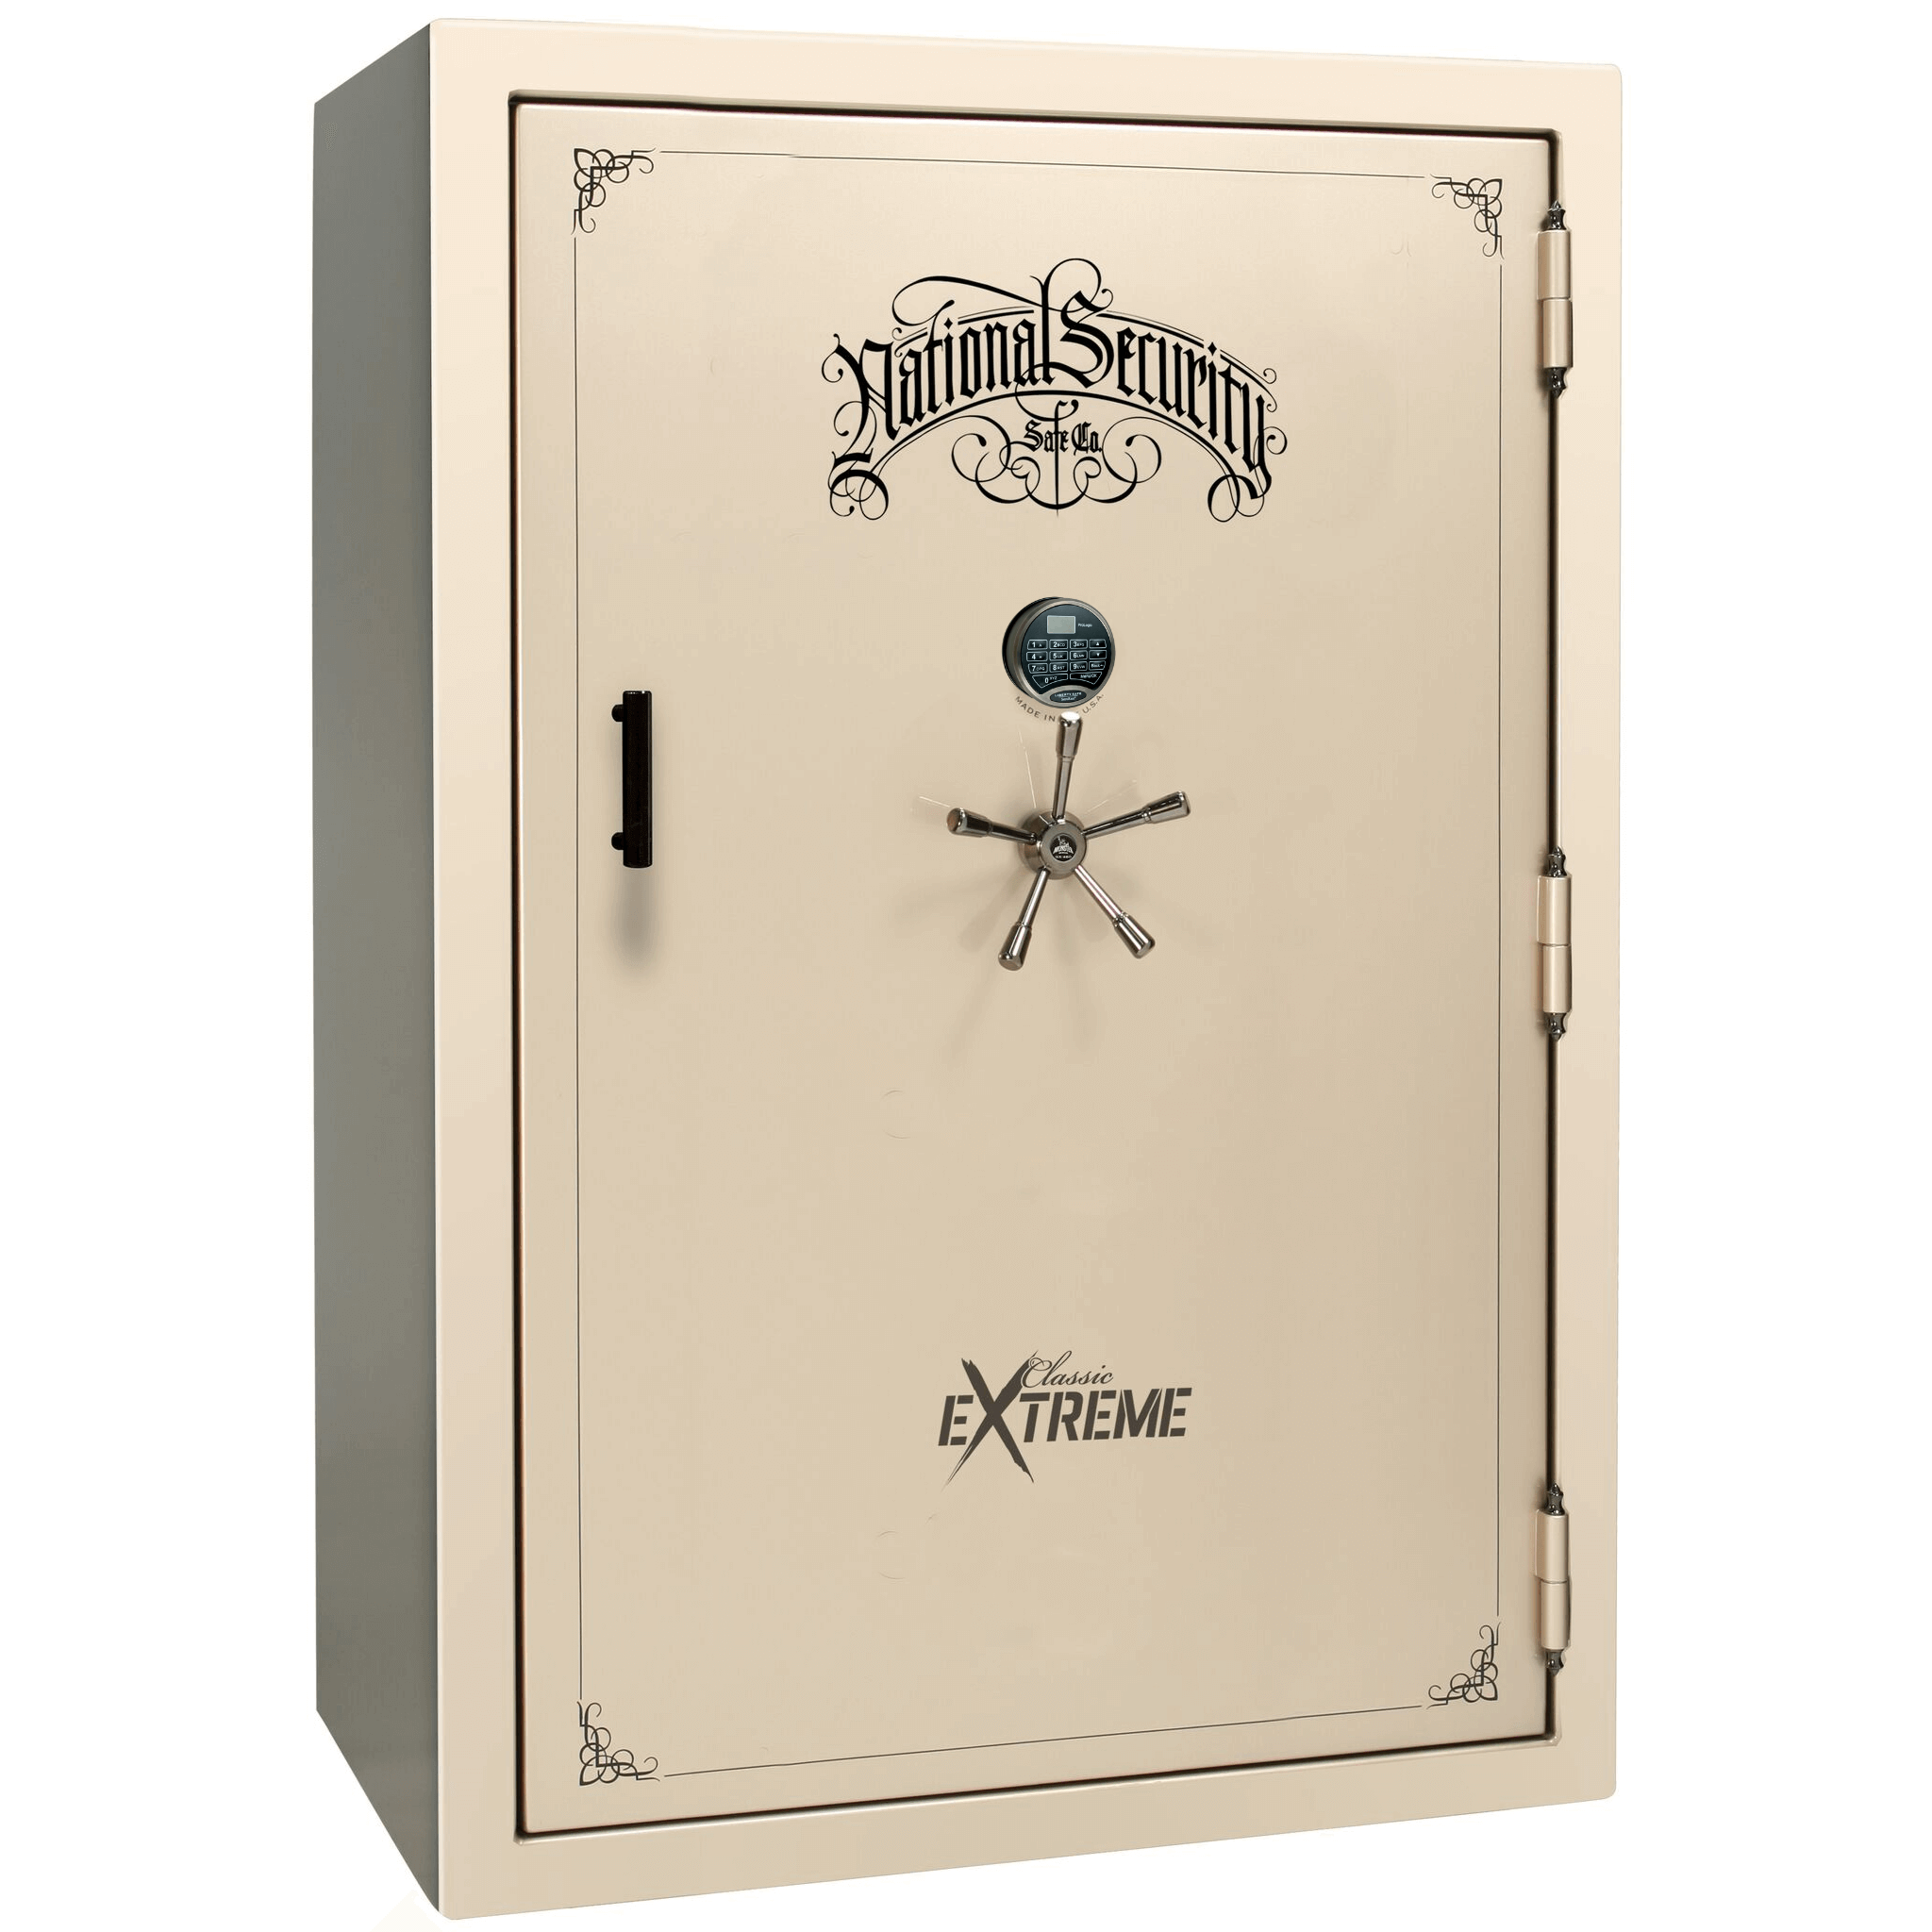 Liberty National Classic Select 60 Extreme Gun Safe with Electronic Lock, photo 39